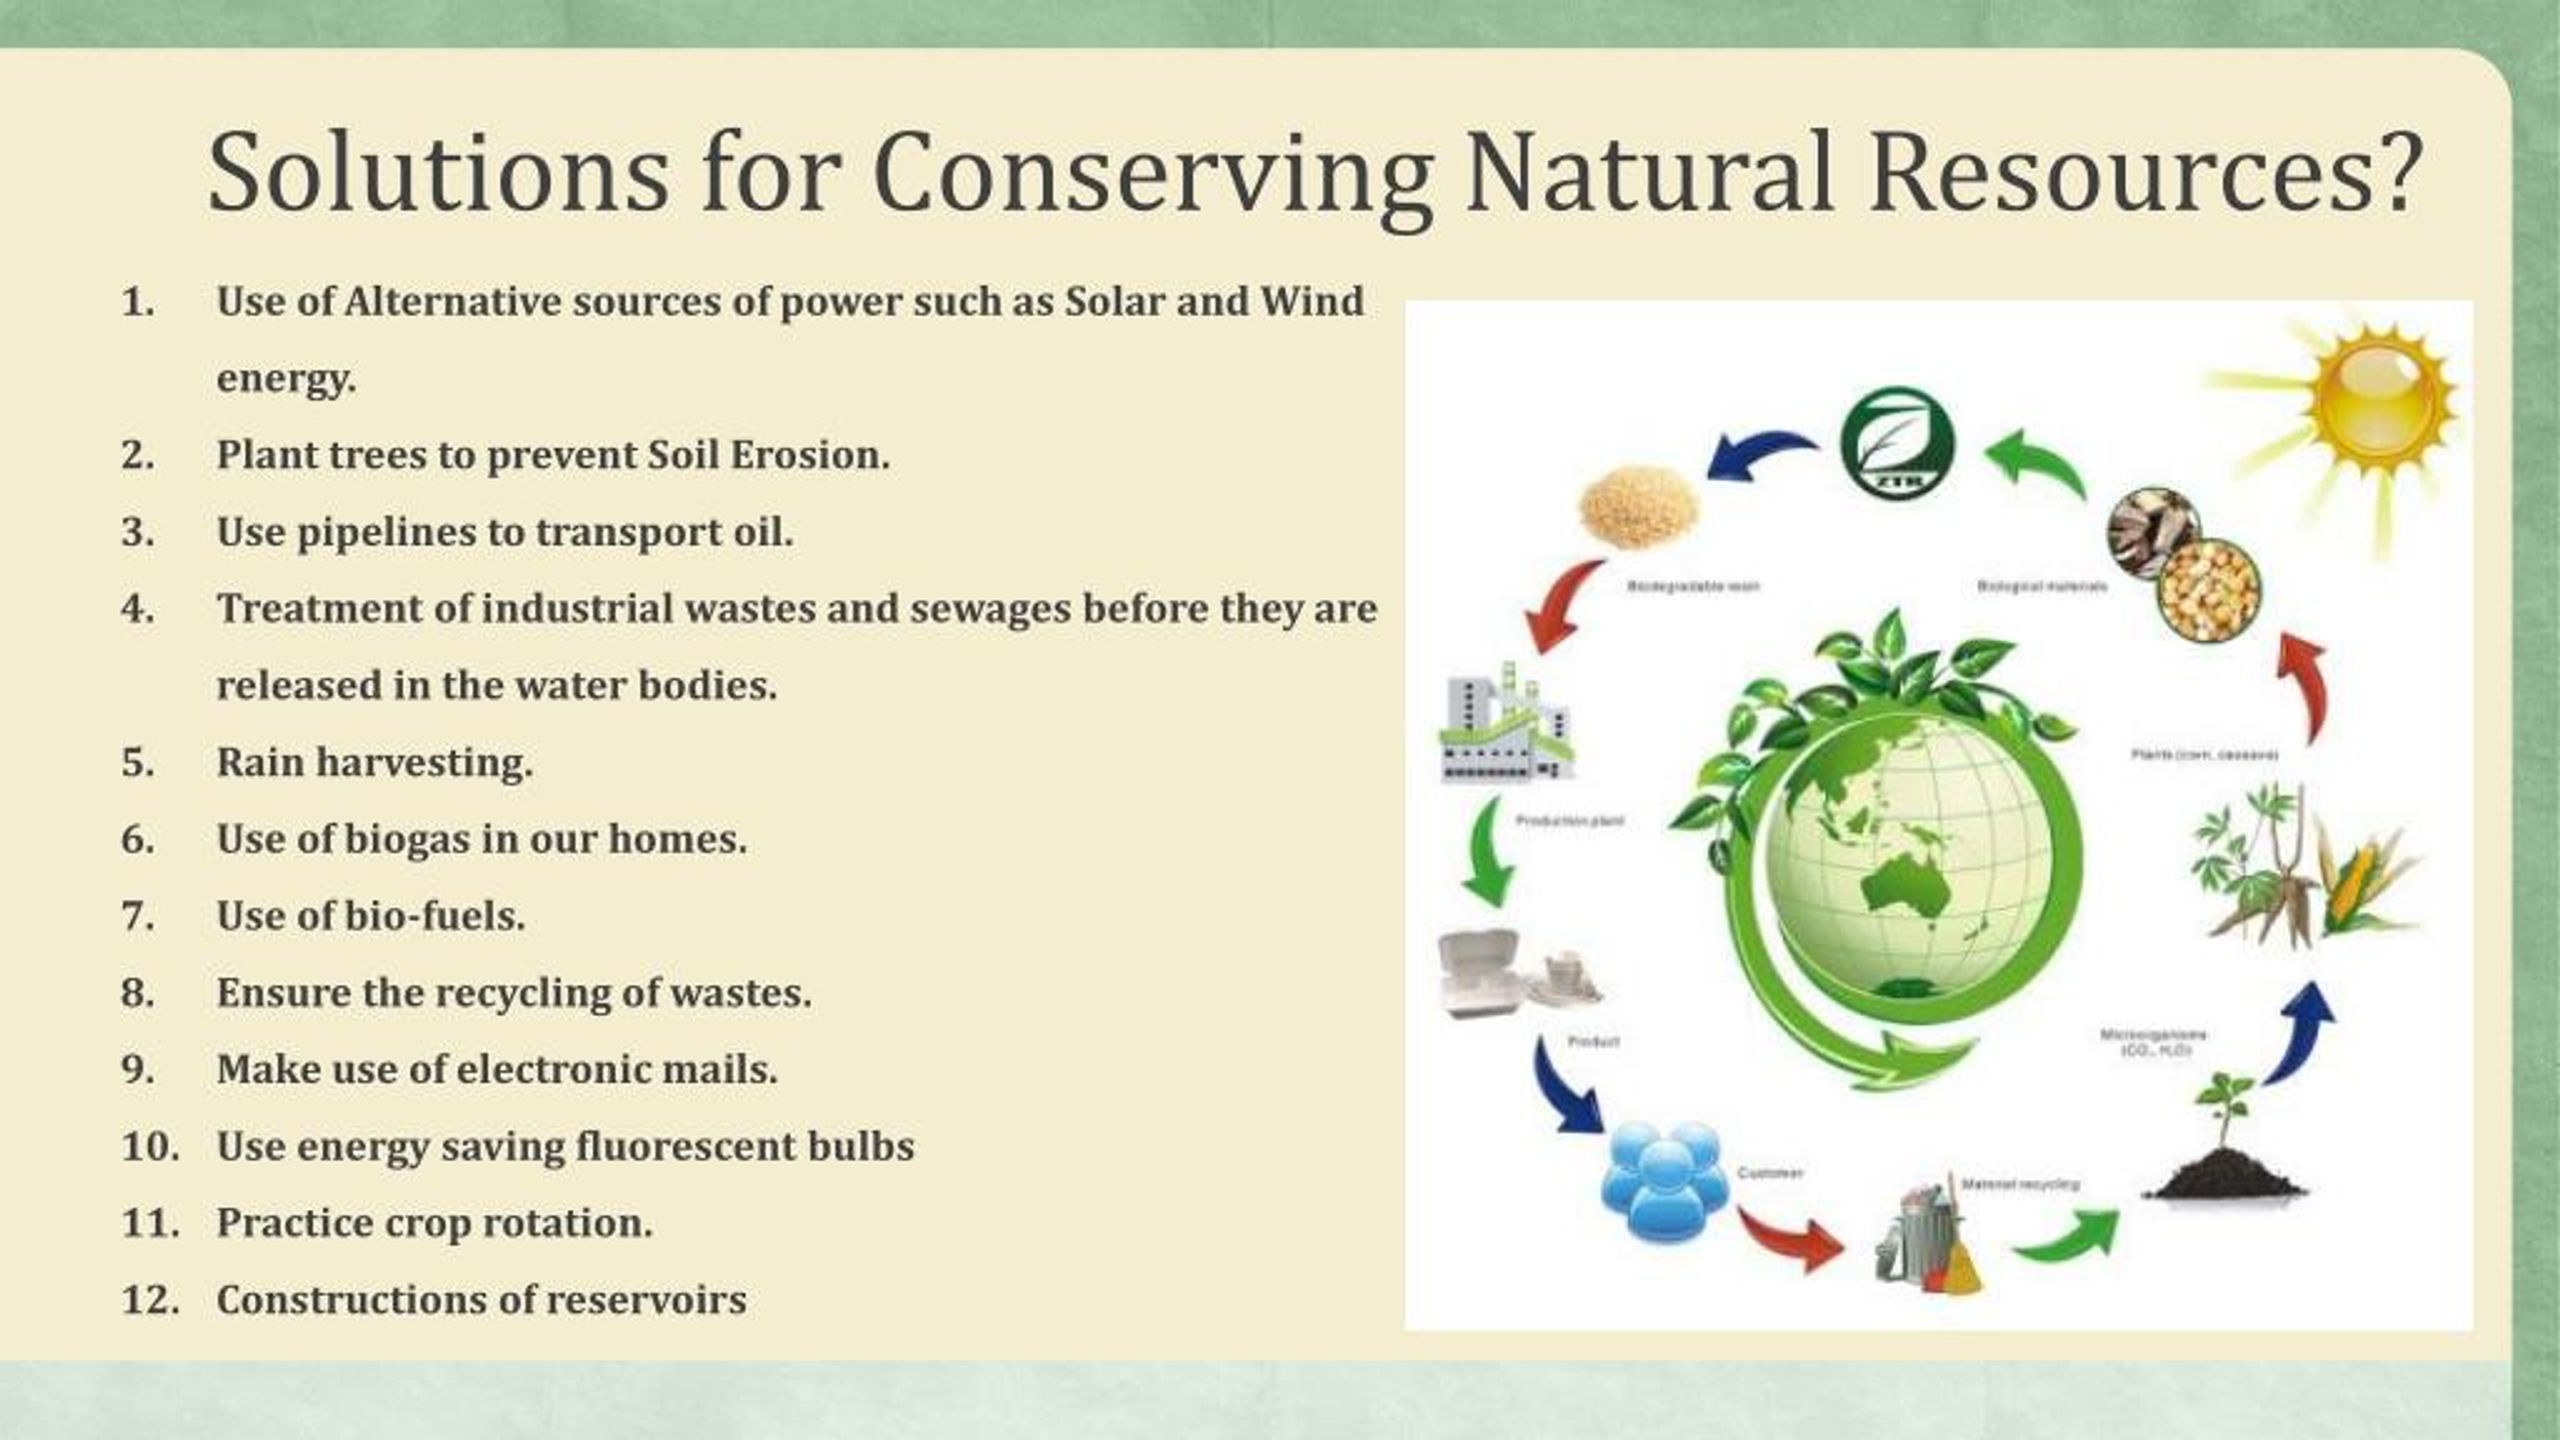 Natural solutions